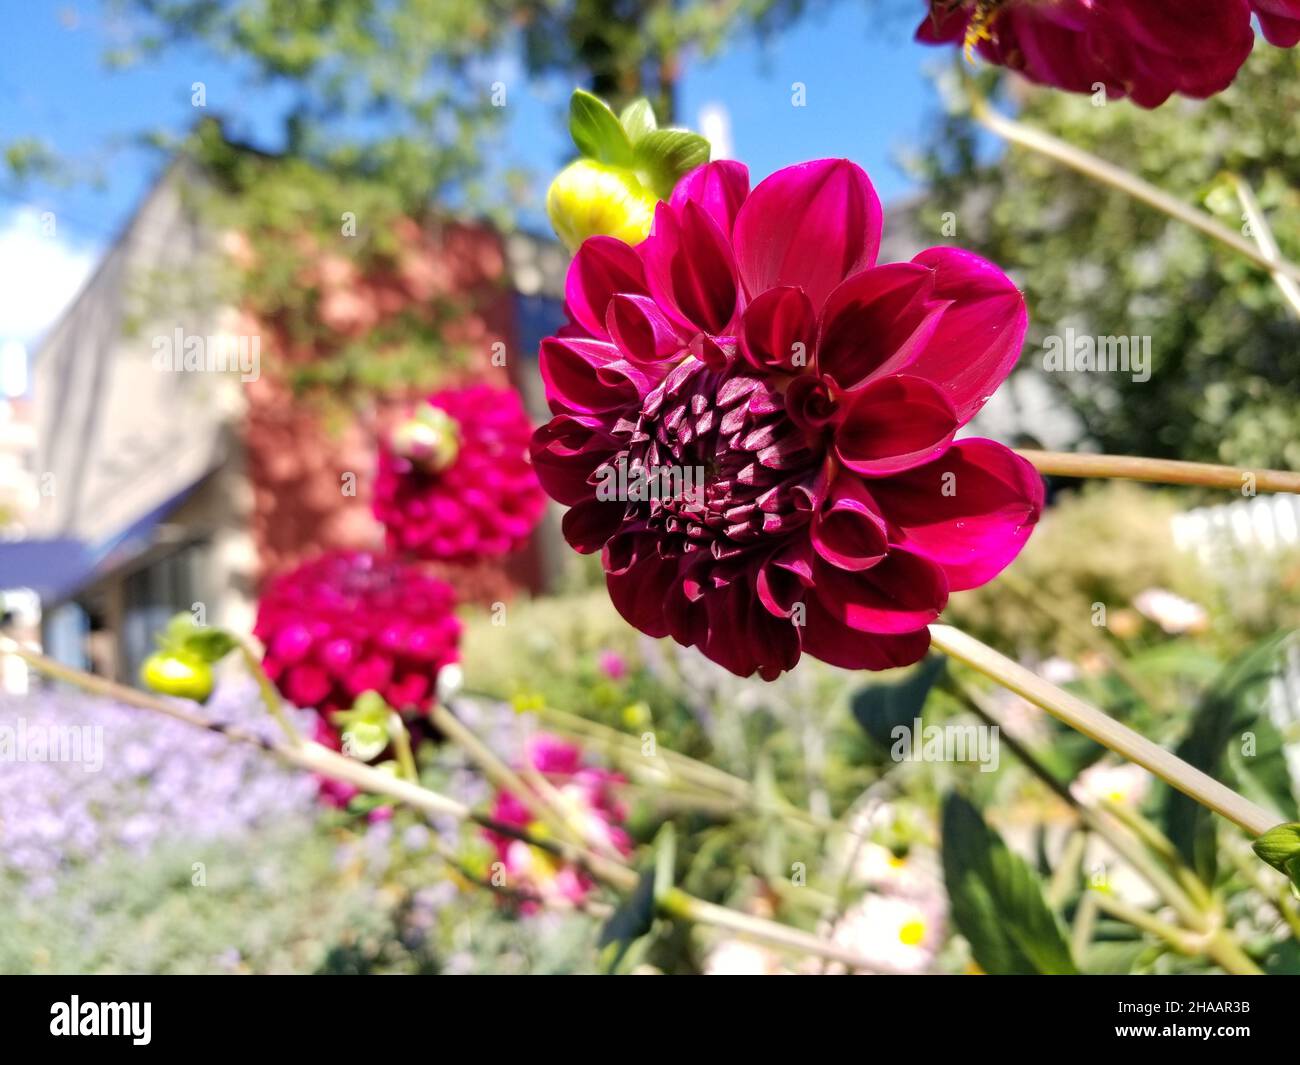 Single, maroon colored, garden dahlia, or dahlia pinnata, on a blurred background of green leaves and grass -01 Stock Photo